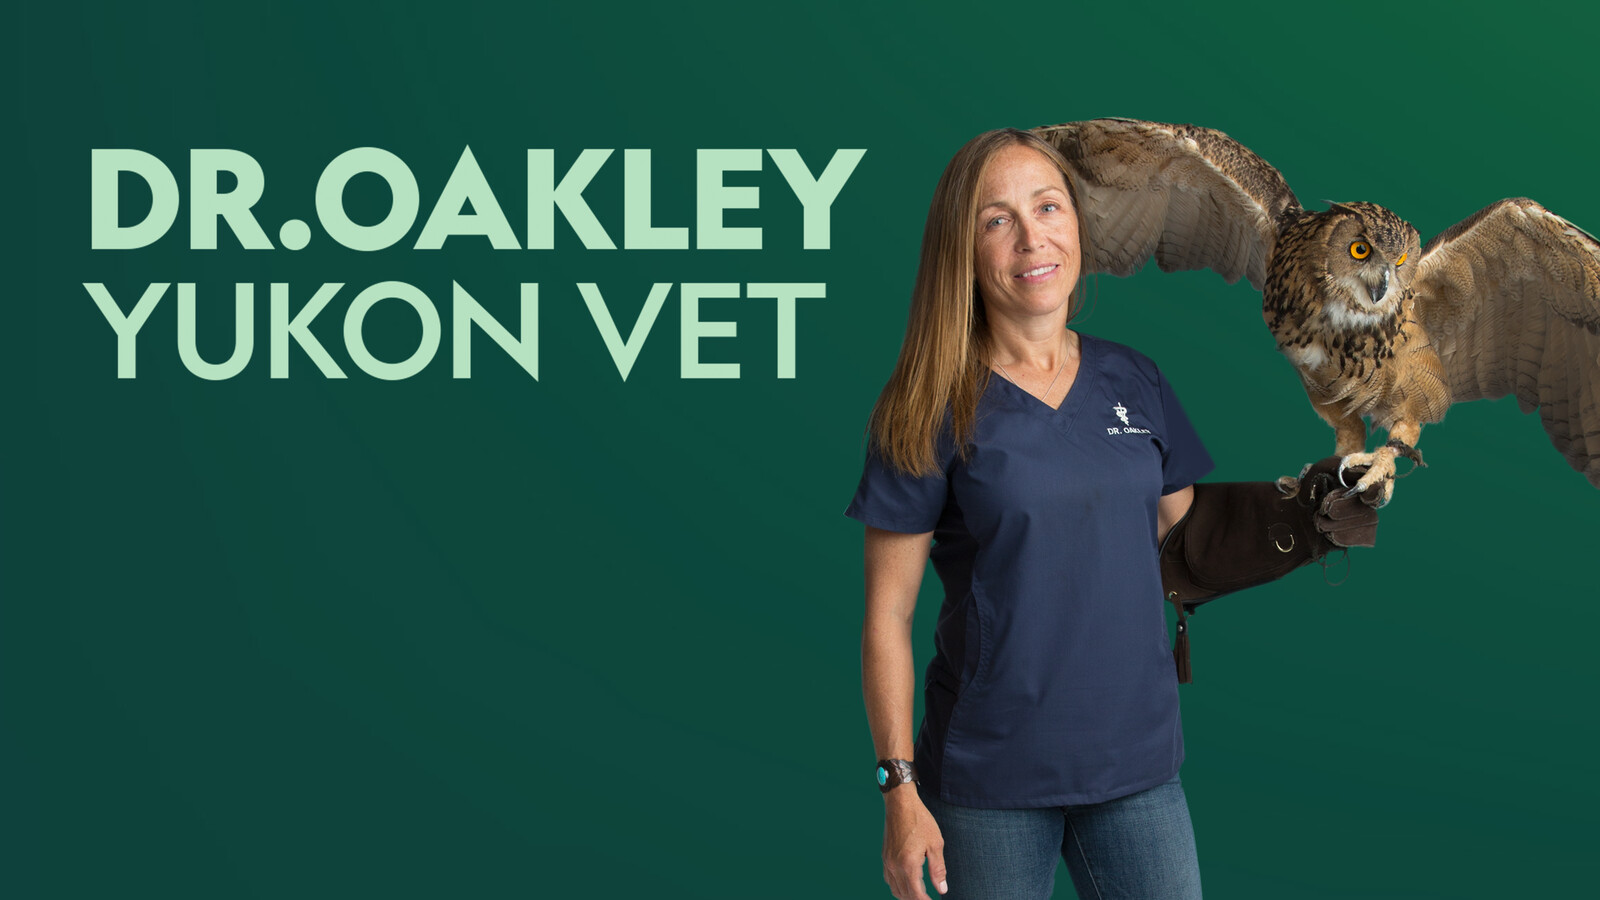 To deal with explosion shoulder About Dr. Oakley, Yukon Vet TV Show Series